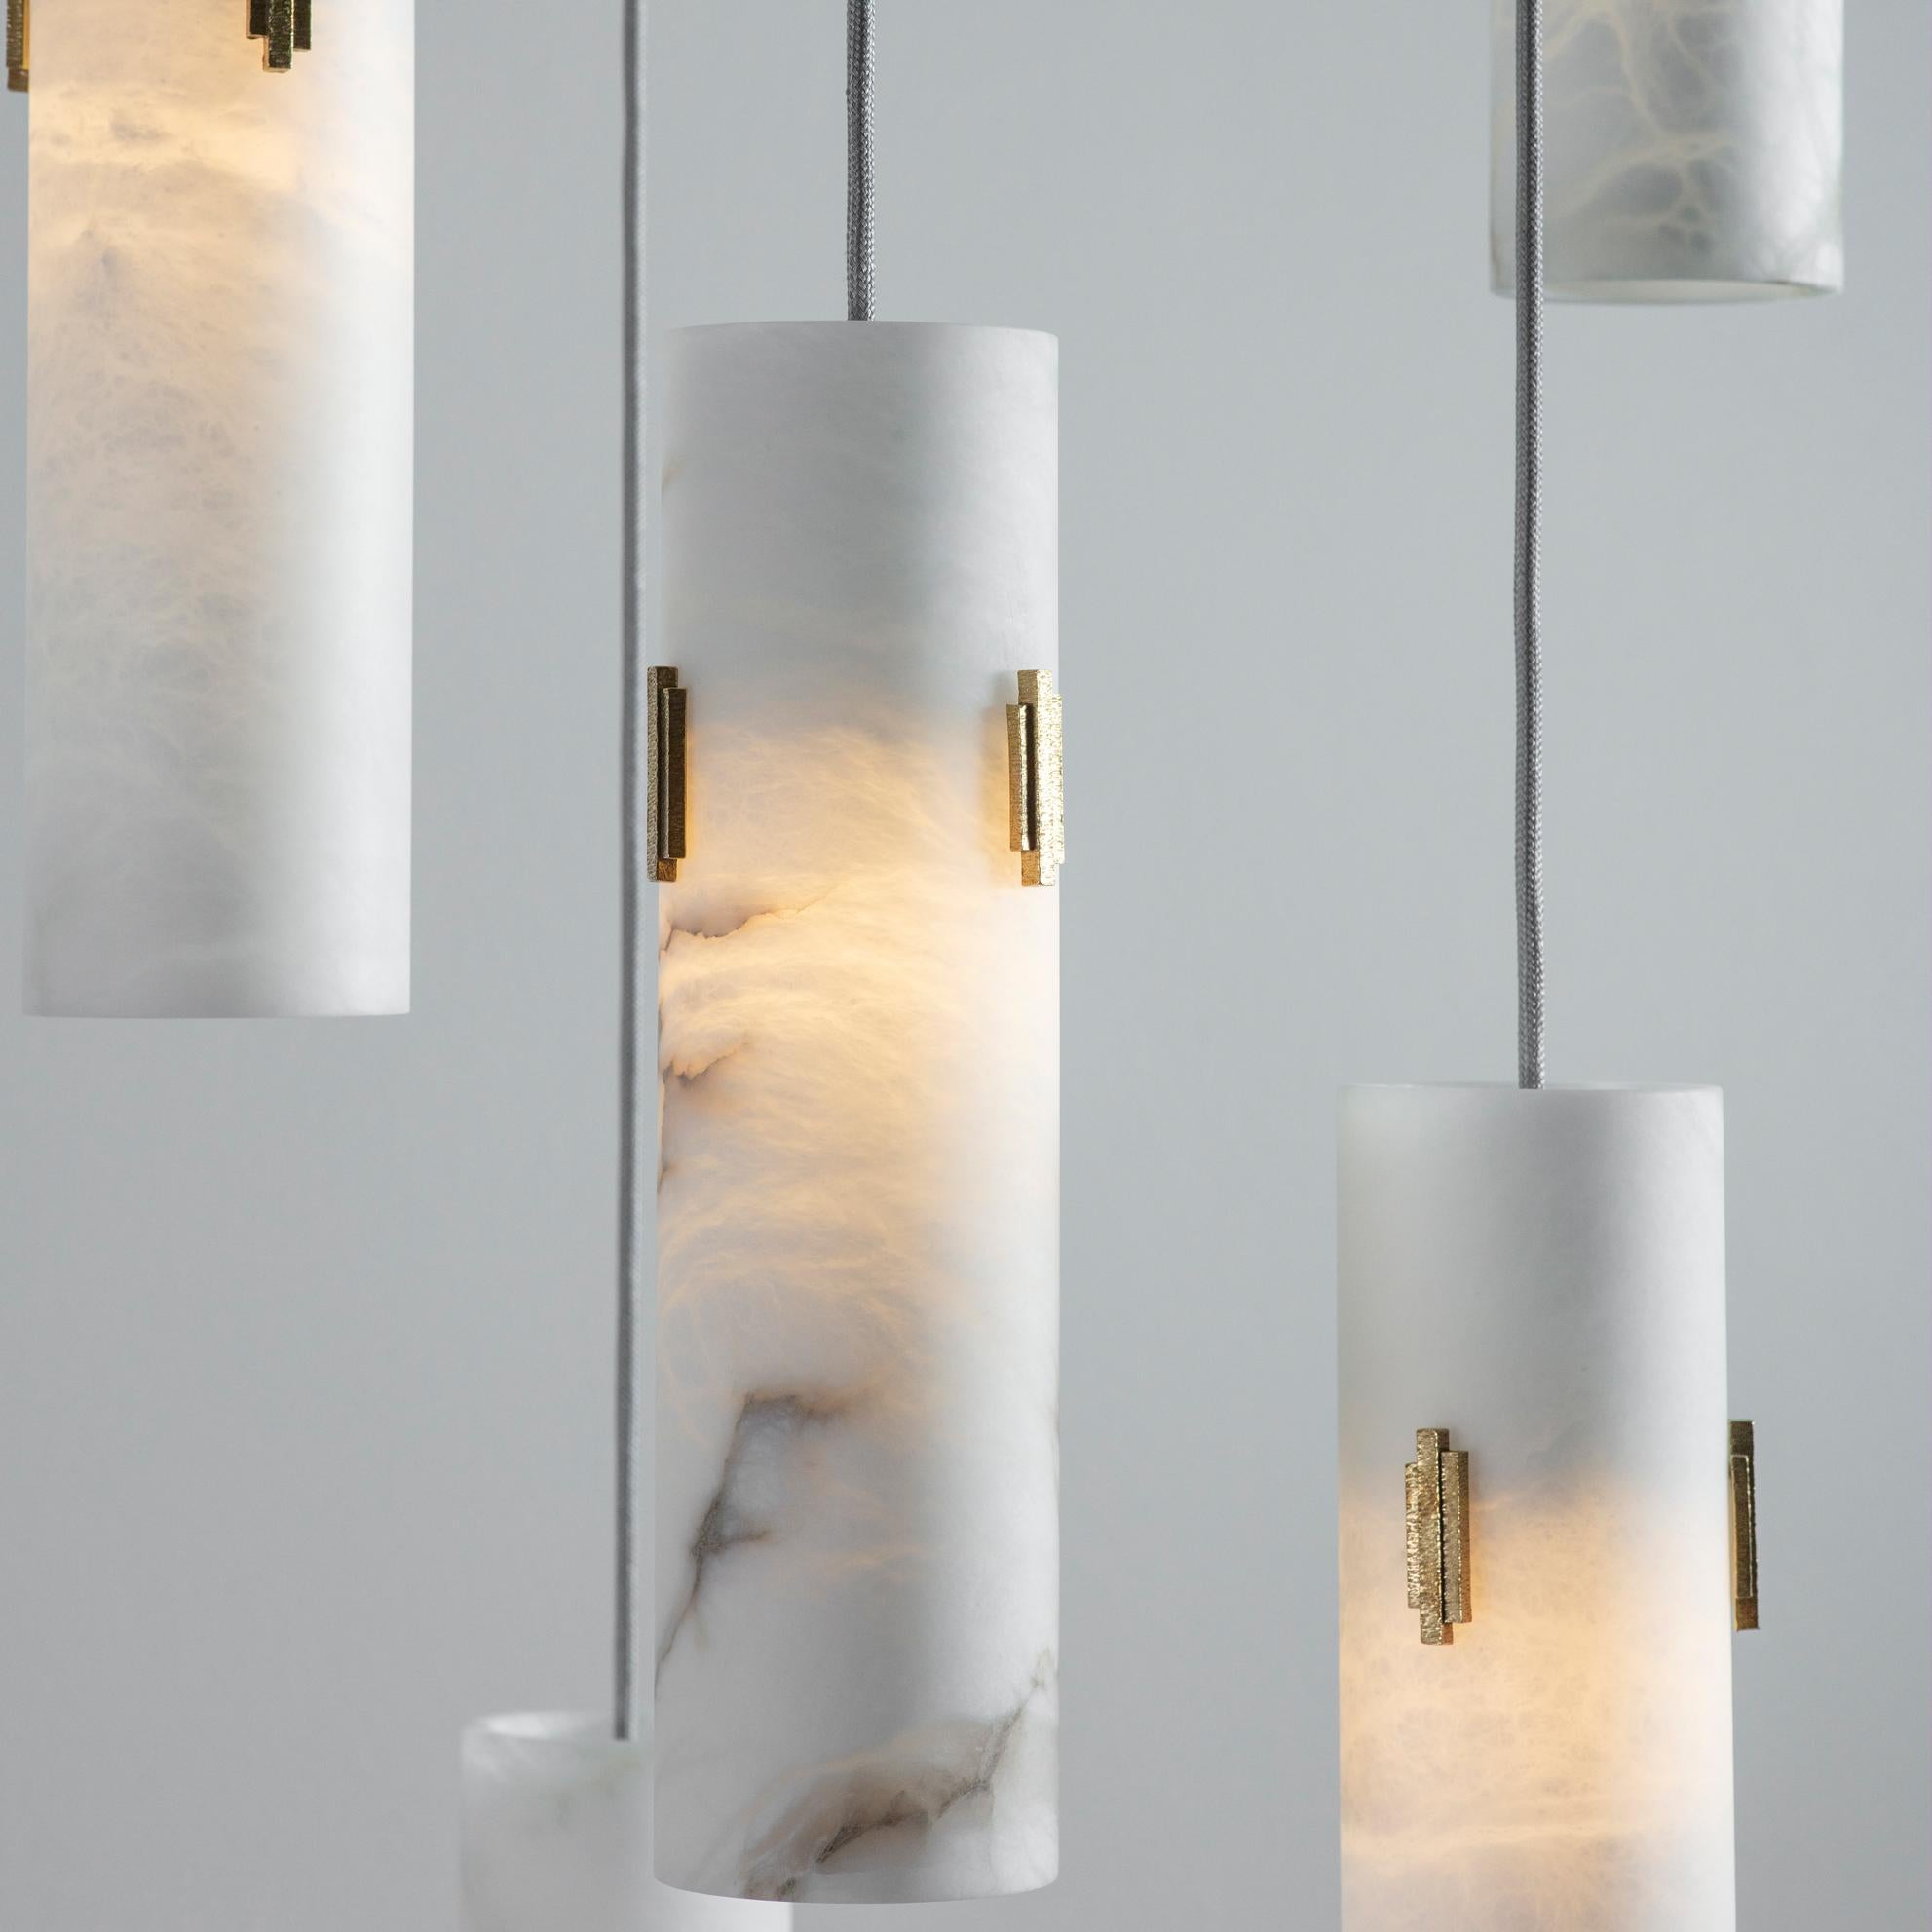 A cluster of pendant lights hewn from solid Alabaster. When lit, the alabaster shade offers a stunning diffuse light and displays a fascinating marbled texture. Each Alabaster Pendant Light shade is adorned with three Antique Brass Deco